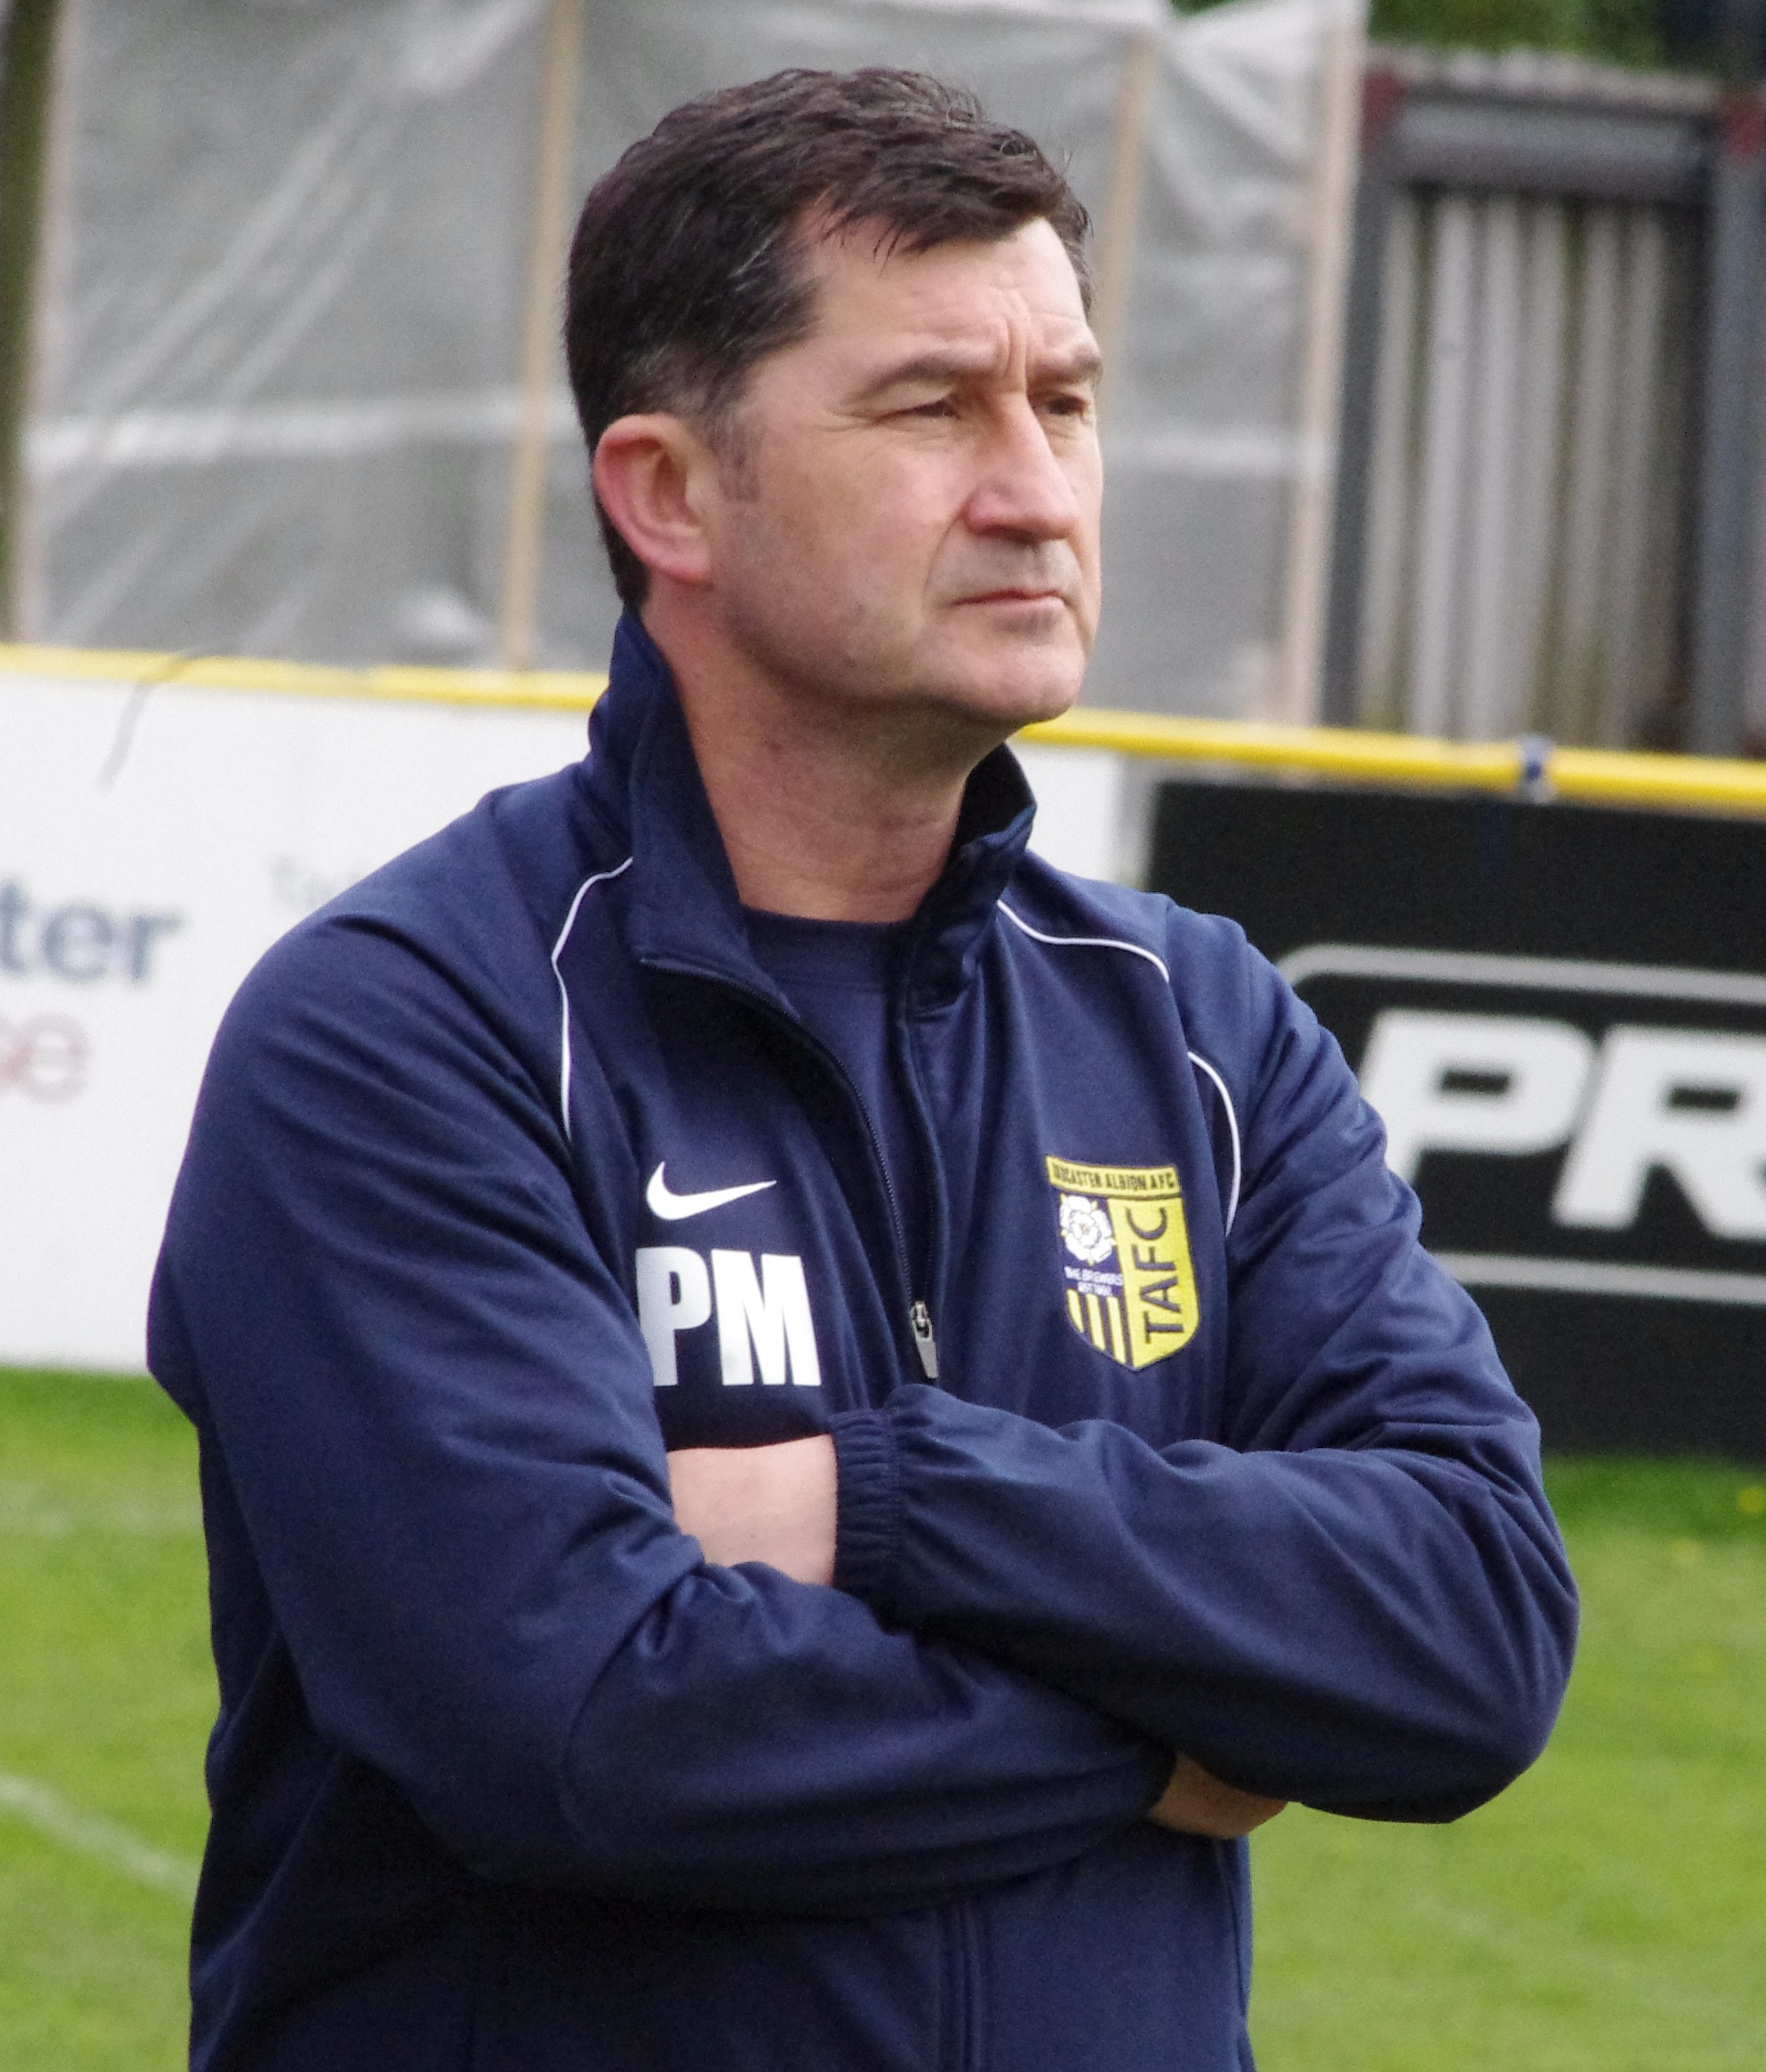 Tadcaster Albion and Paul Marshall have a special guest on Thursday at i2i Stadium in the shape of the FA Cup